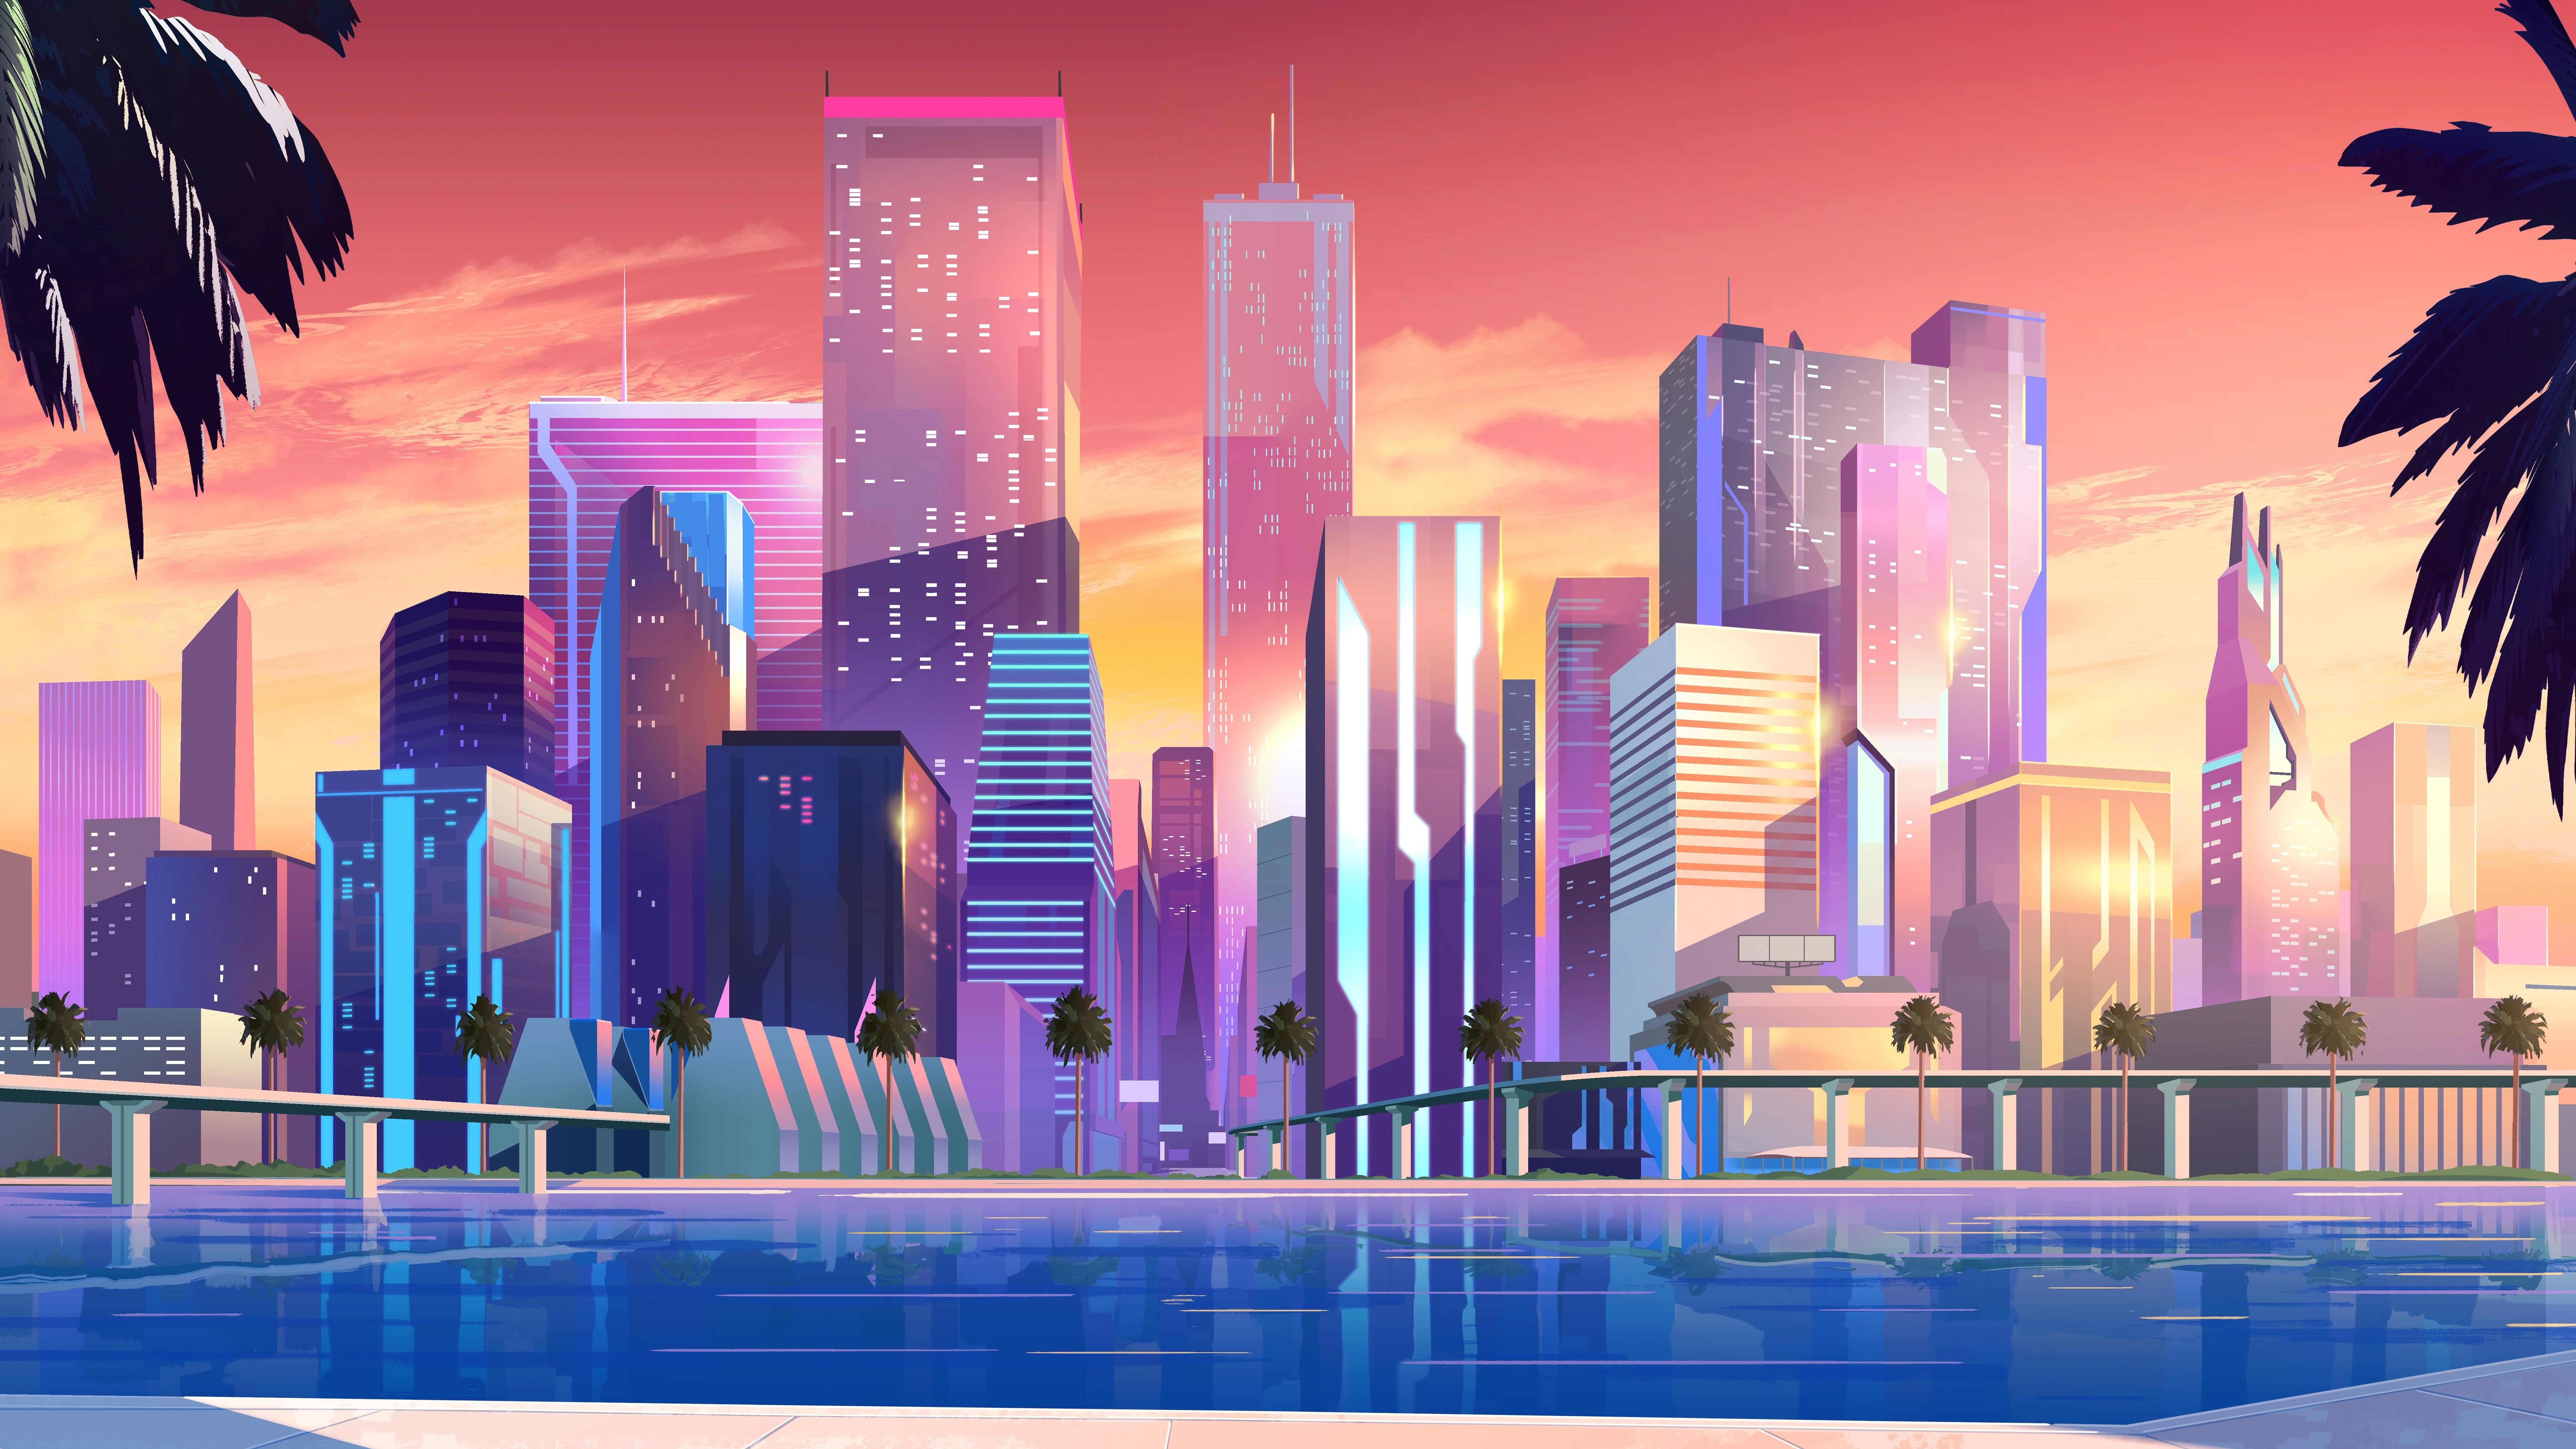 7680 x 4320 · jpeg - Synthwave vibrant cityscape wallpaper - backiee